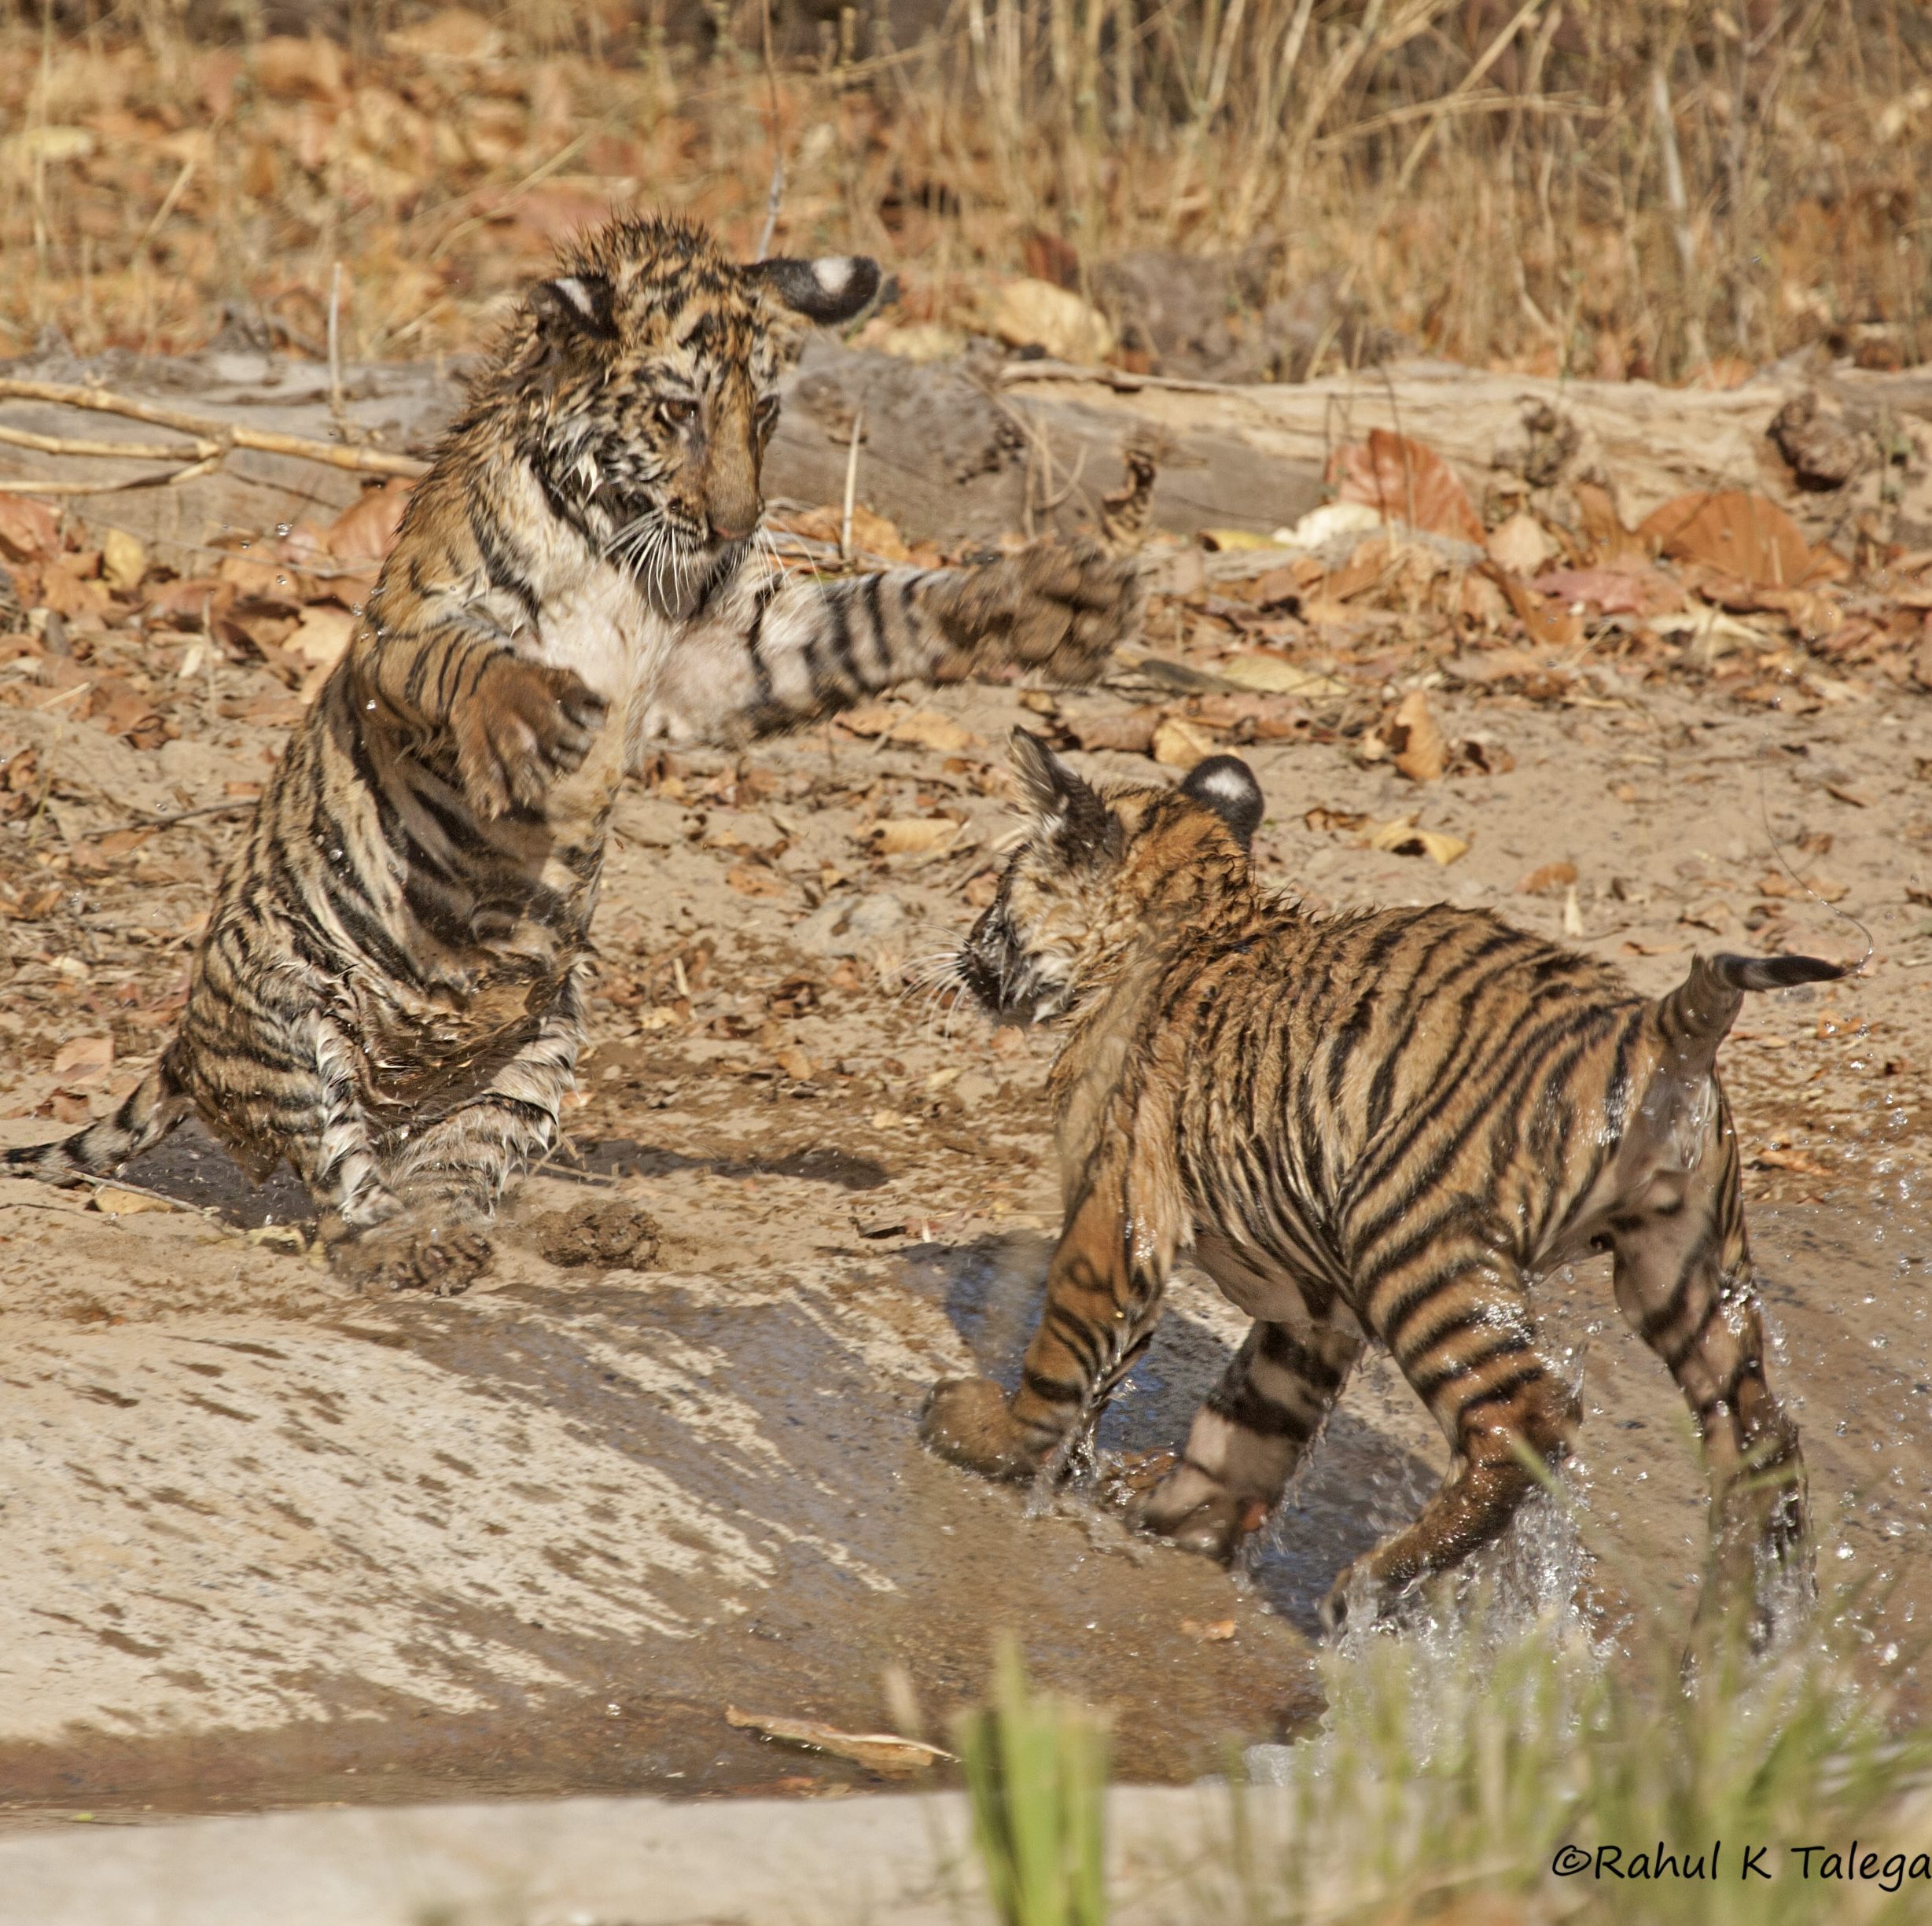 Two tiger cubs face off in central India